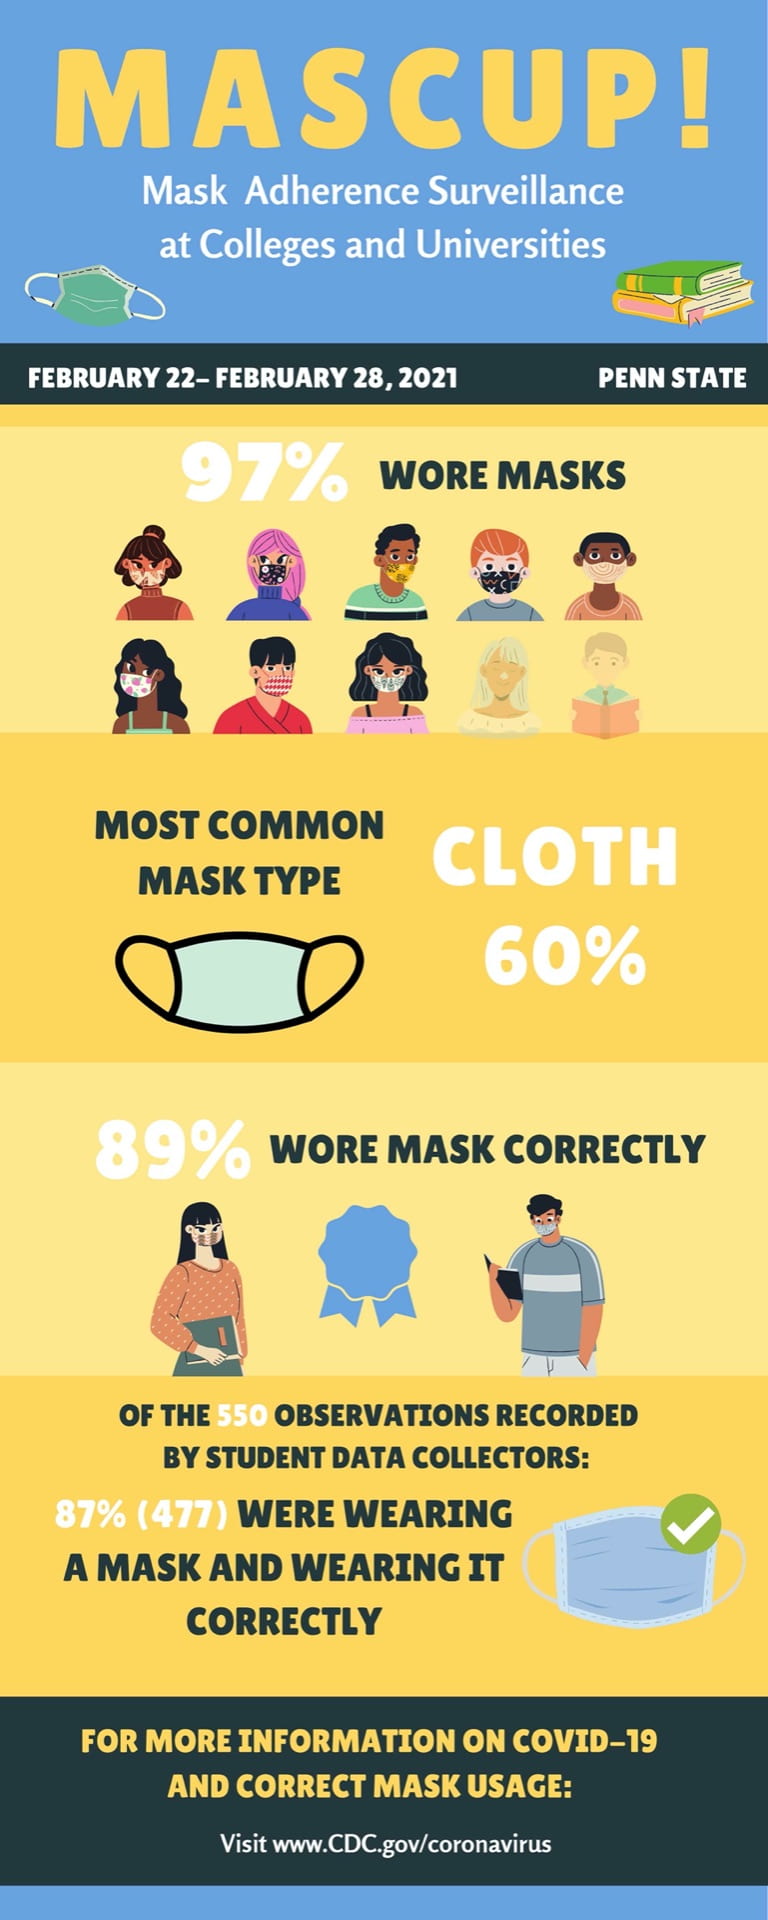 MASCUP! - Mask Adherence Surveillance at Colleges and Universities infographic from Feb. 22 - Feb, 2021. 97% wore masks; Most common mask type is Cloth at 60%; 89% wore mask correctly; Of the 550 observations recorded by student data collectors 87% were wearing a mask and wearing it correctly. For more info on COVID-19 mask usage: www.cdc.gov/cornavirus